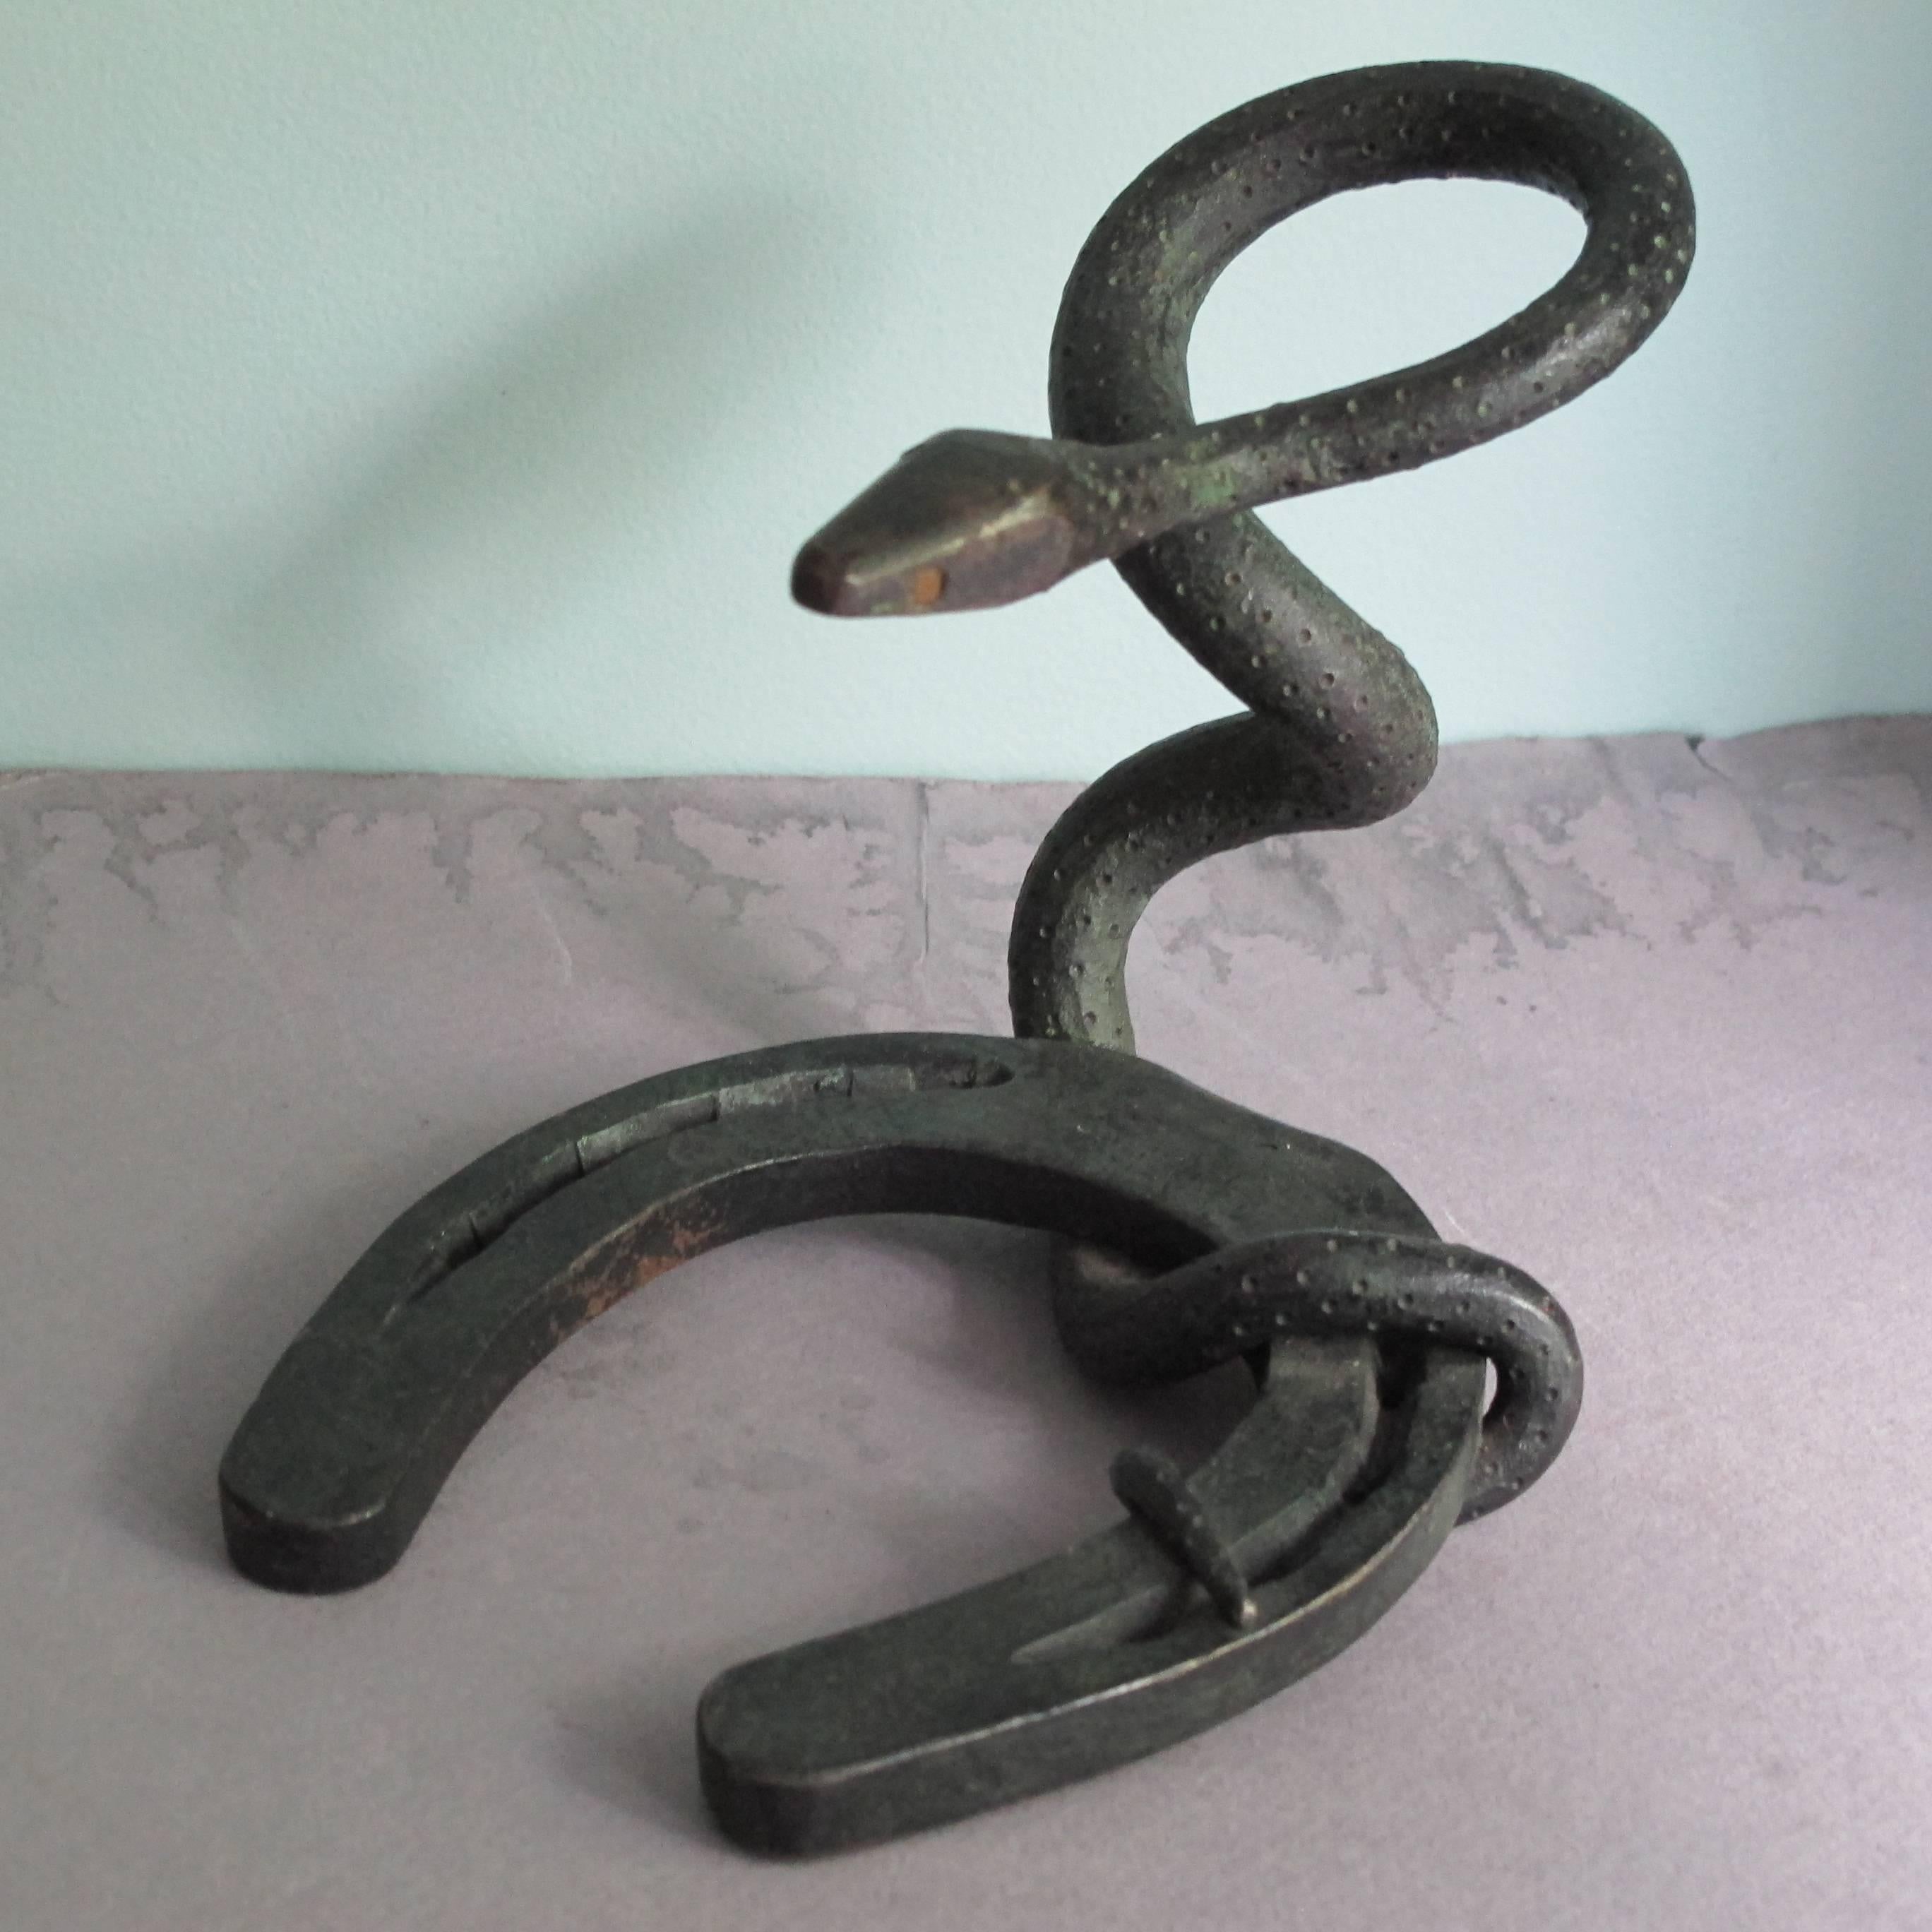 The art of the blacksmith in a nonfunctional sculpture probably made as a gift. After making endless utilitarian pieces of iron work. The unknown creator has formed the iron into a fluid form.